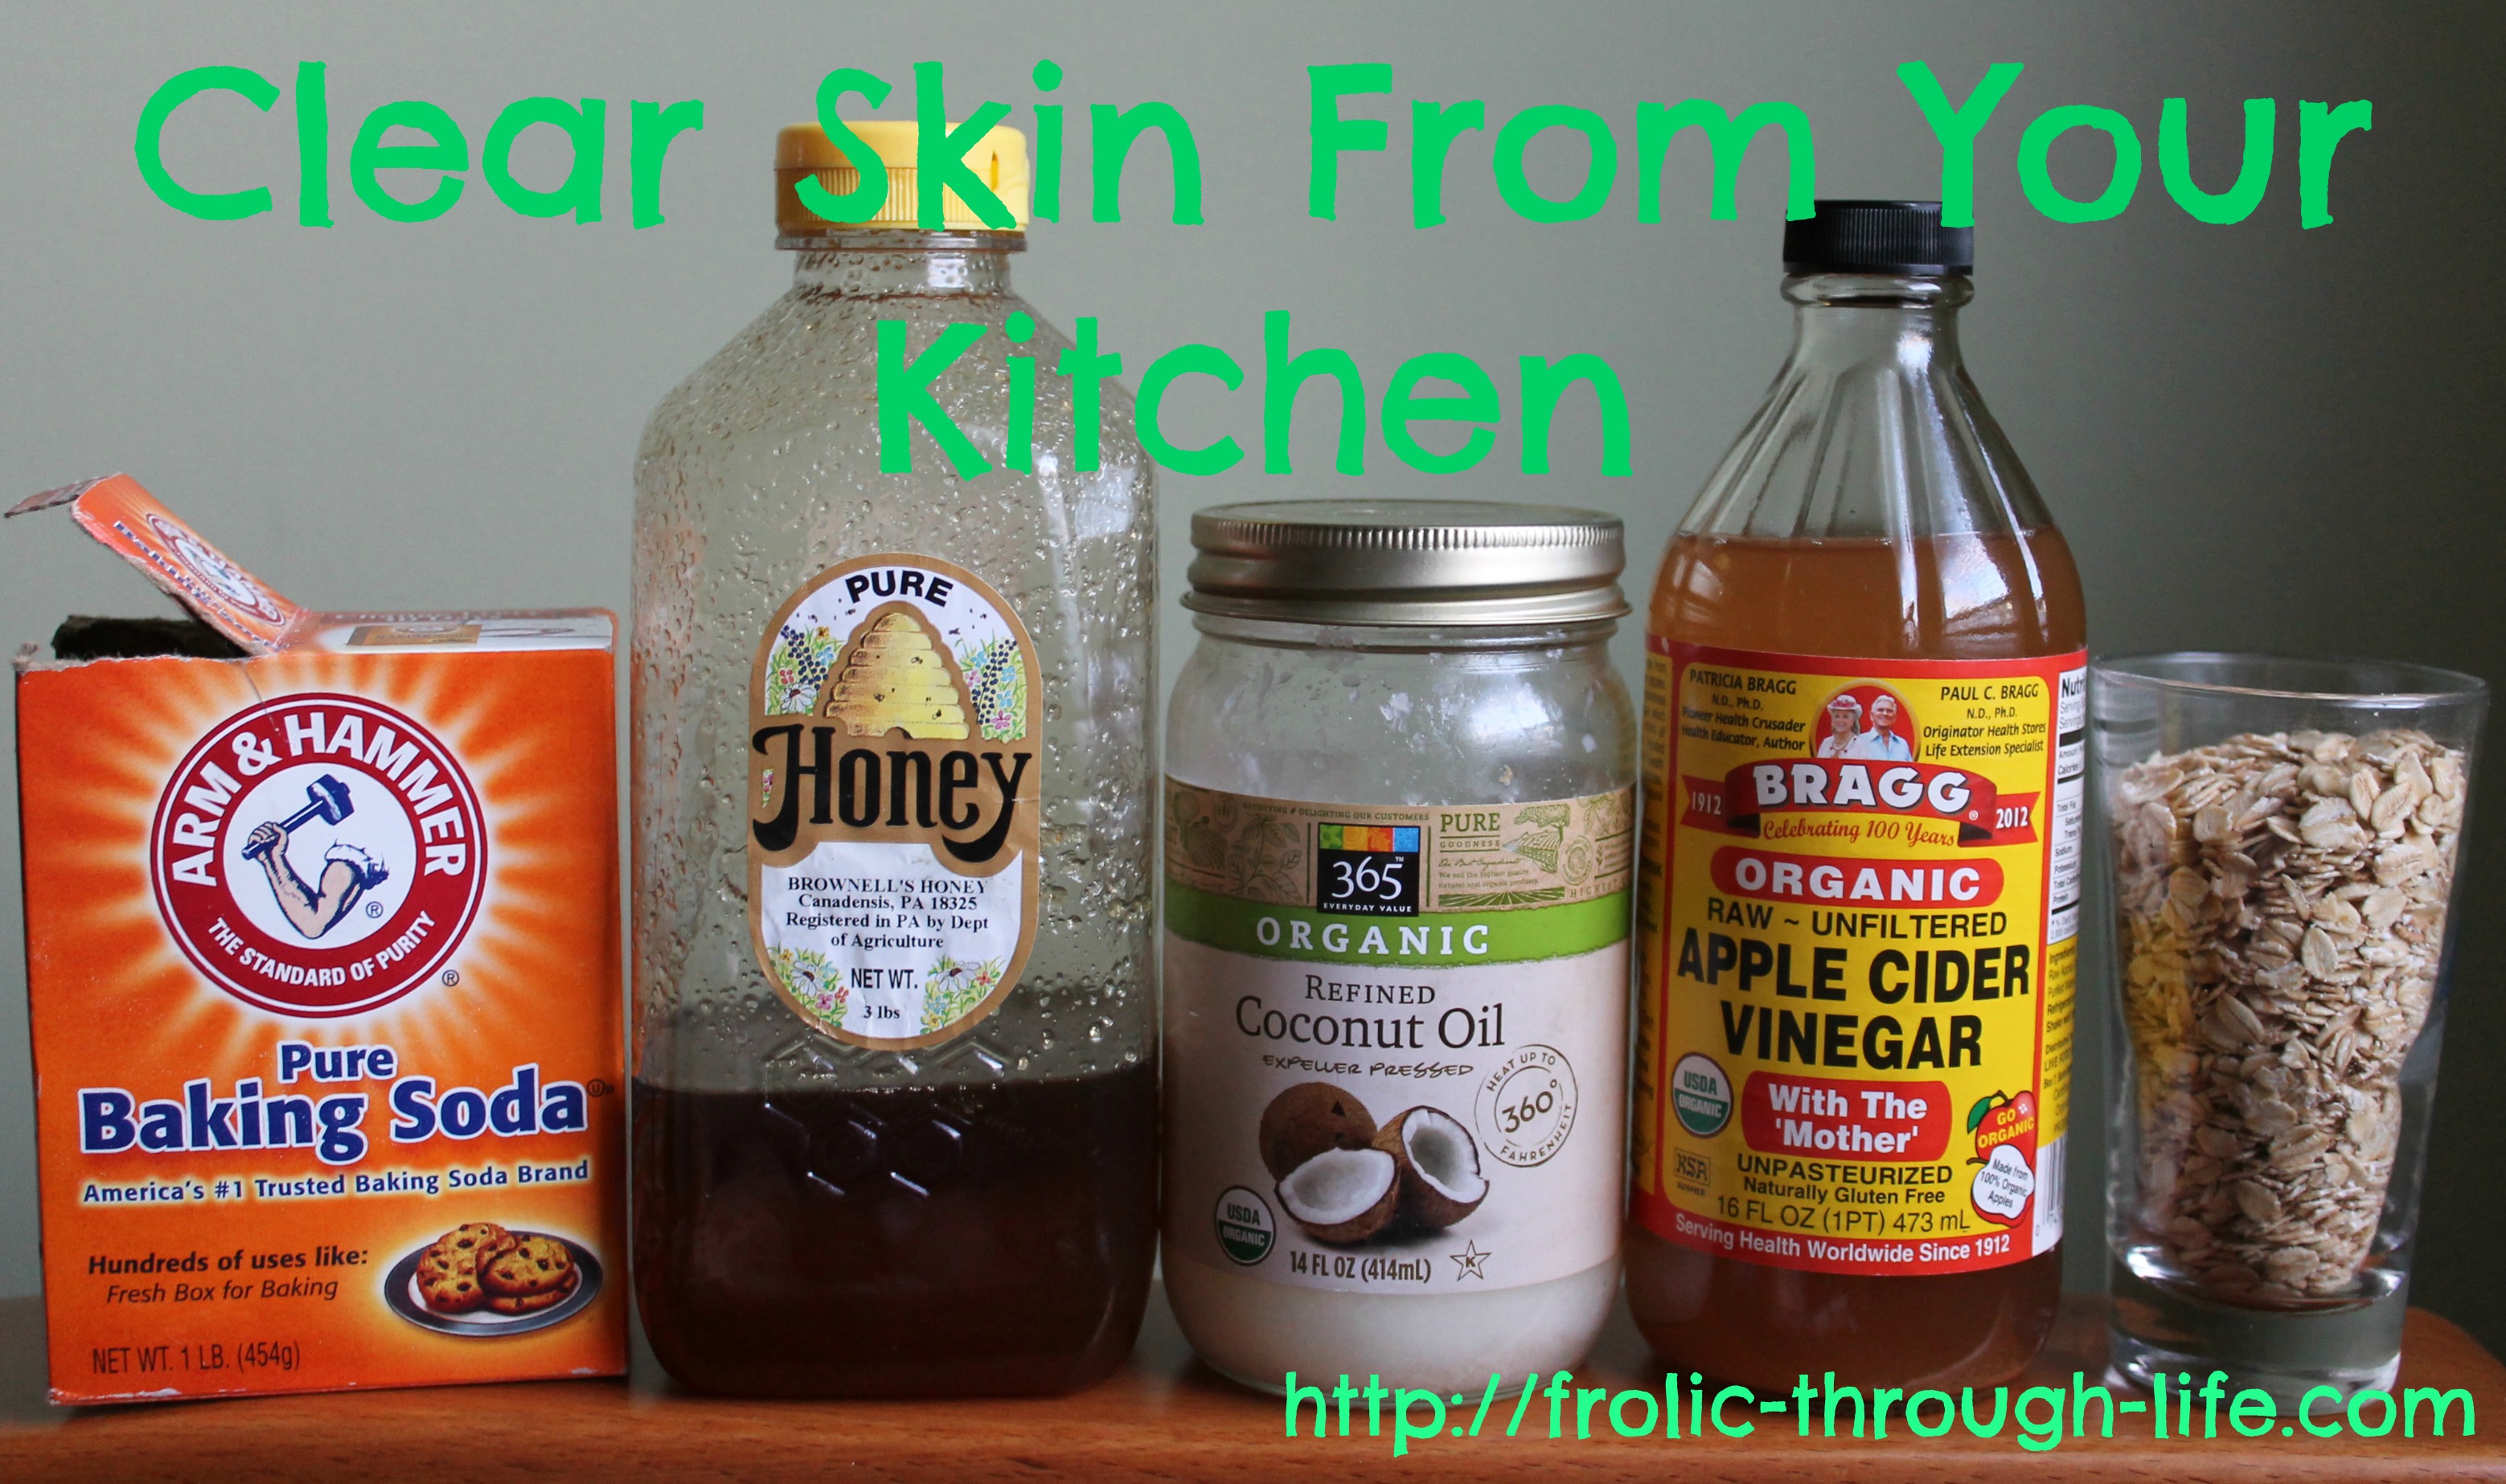 Natural Skin from Your Kitchen